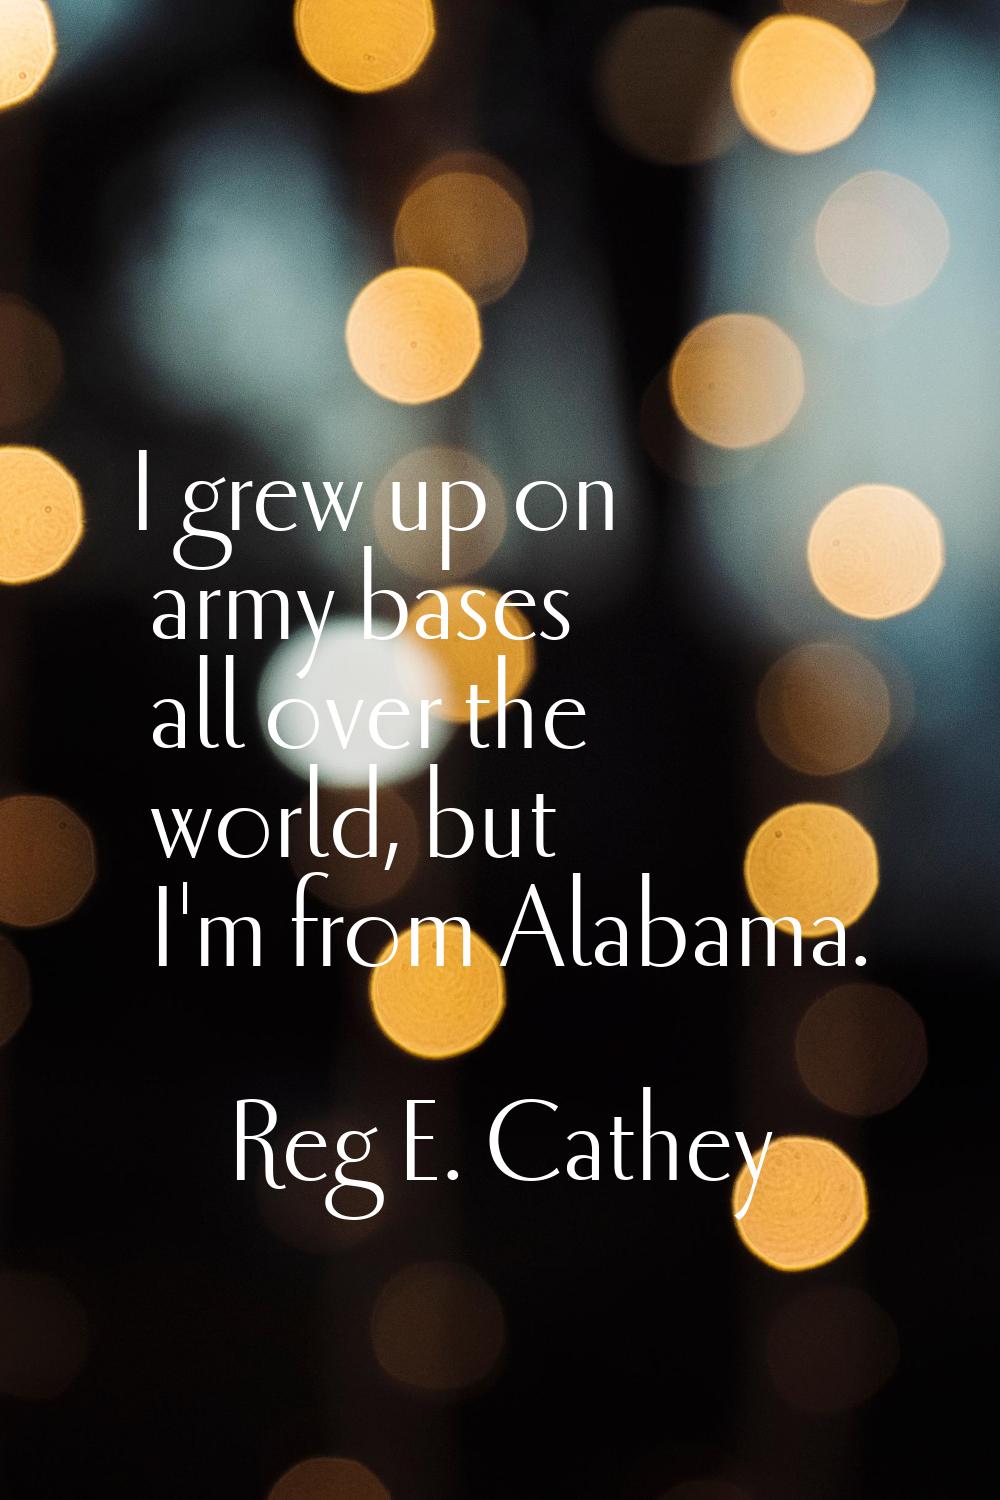 I grew up on army bases all over the world, but I'm from Alabama.